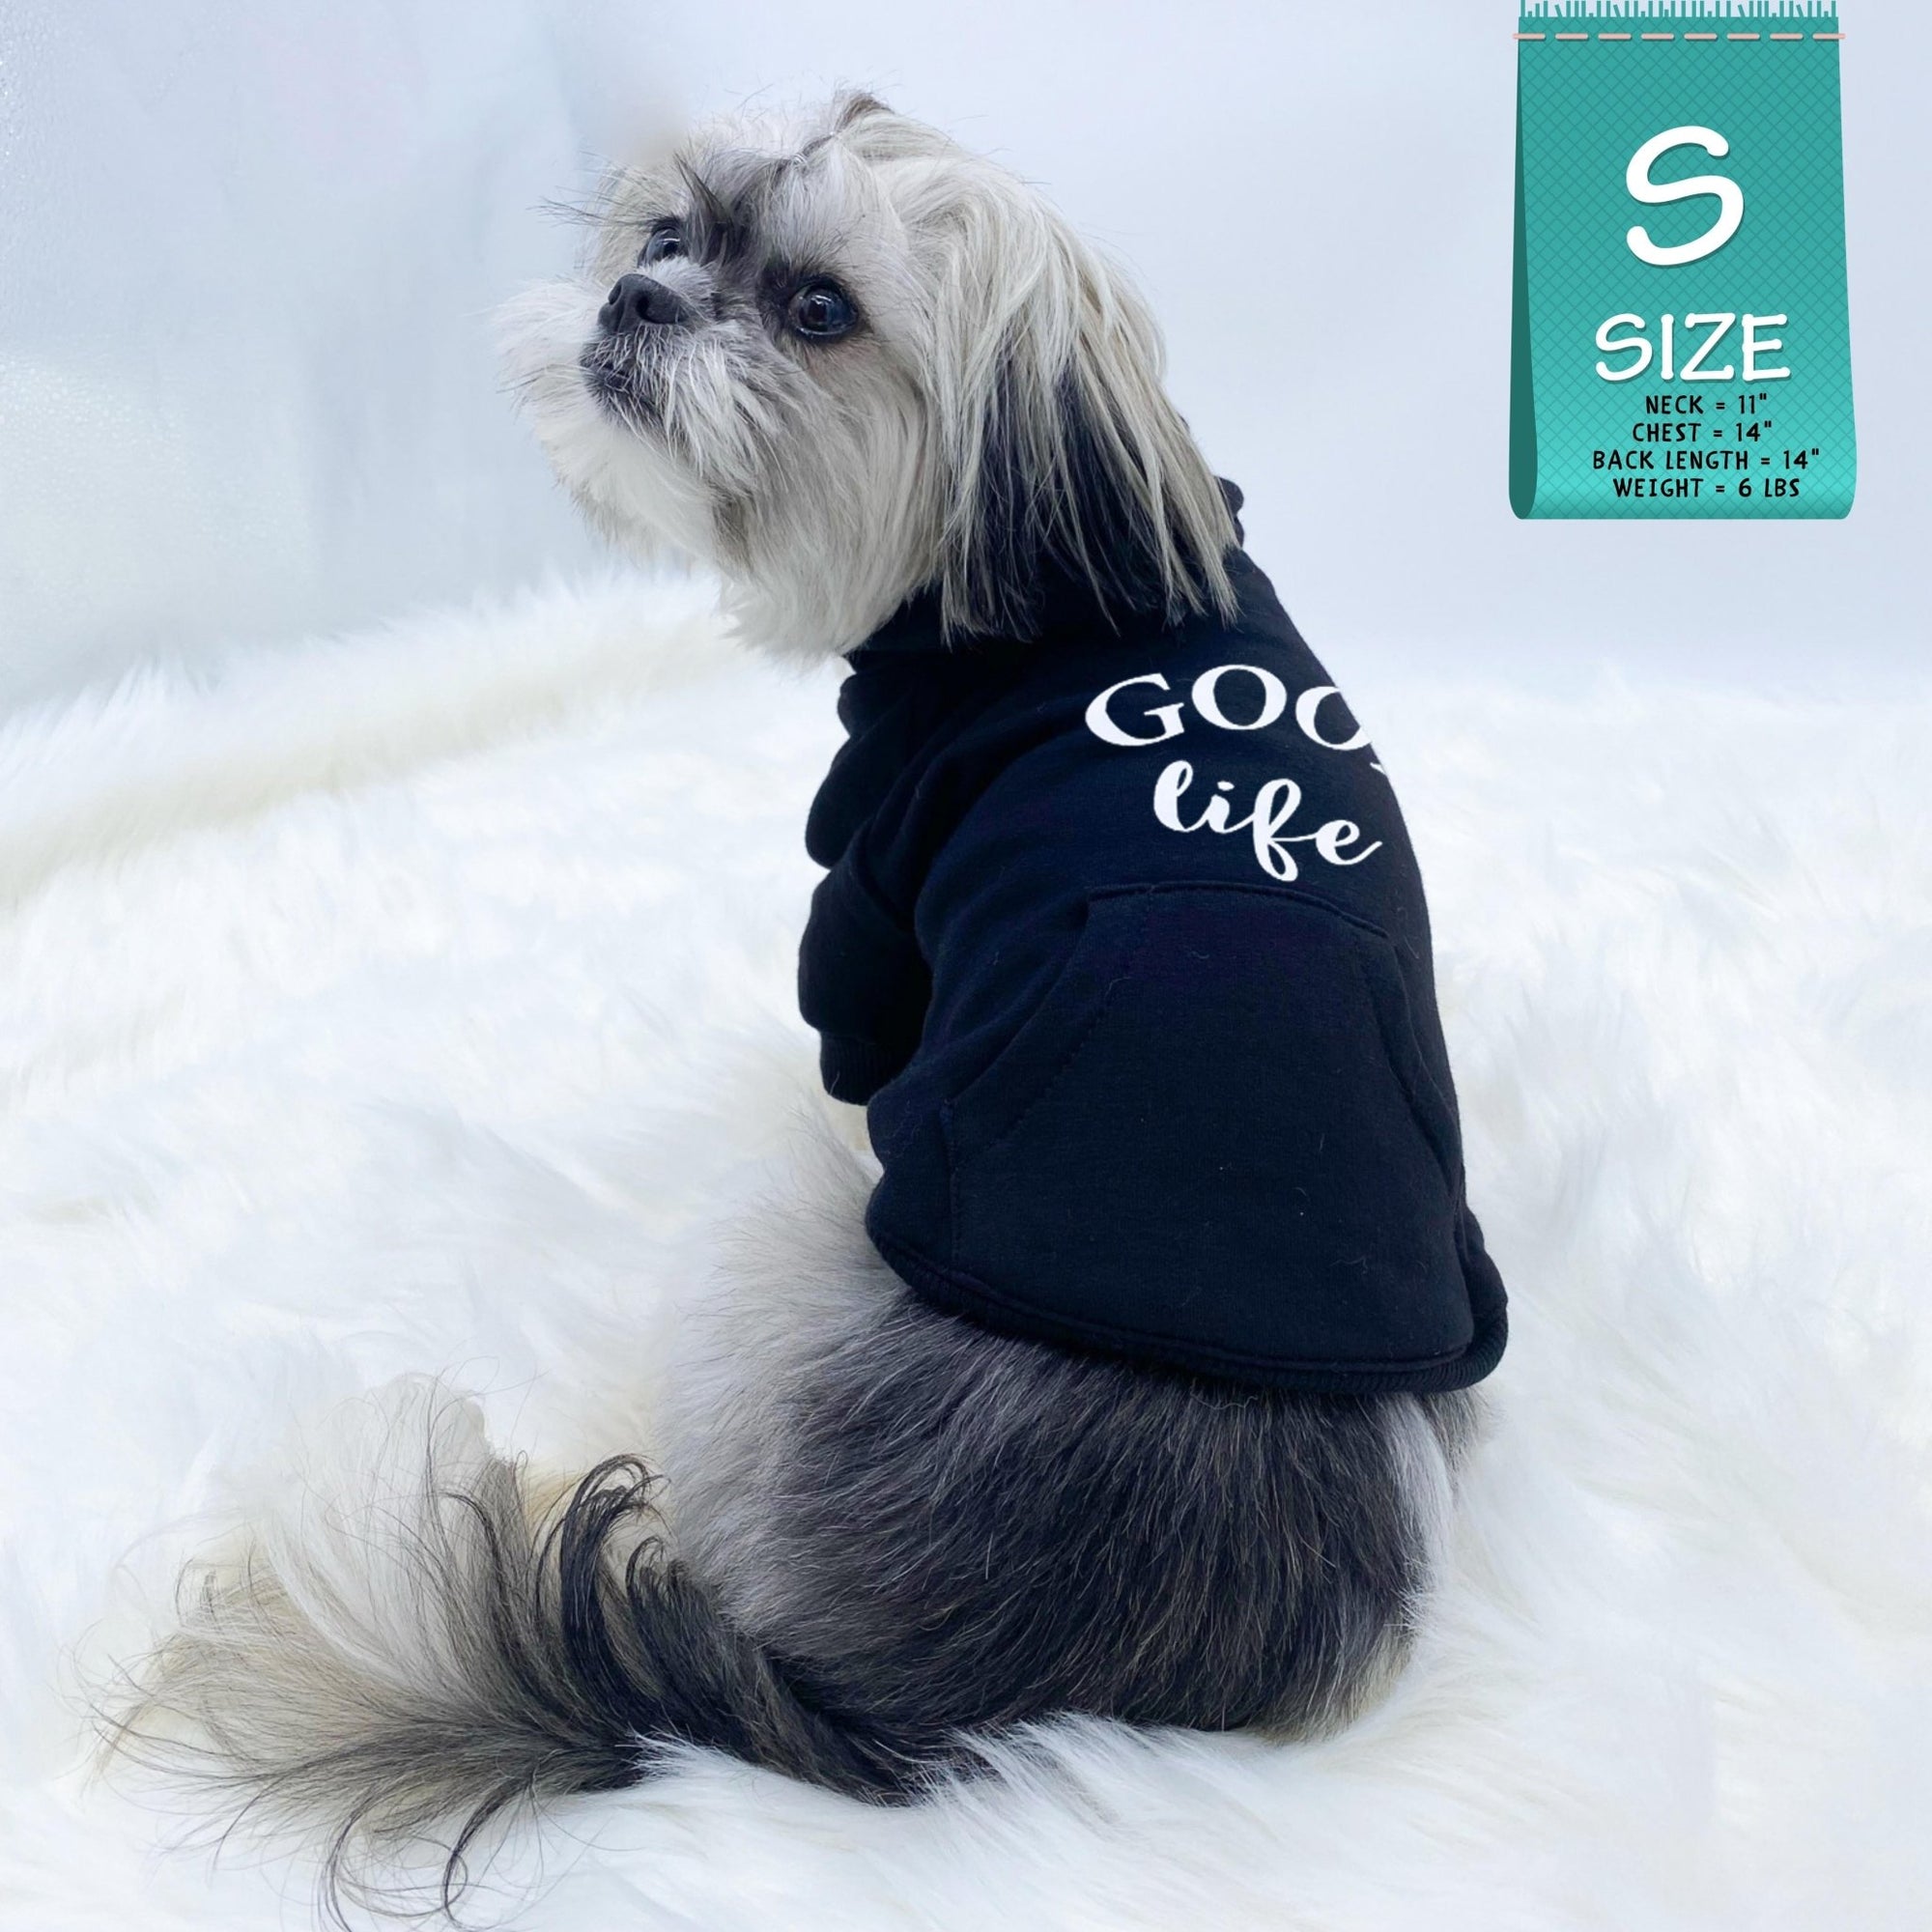 Dog Hoodie - Hoodies For Dogs - Shih Tzu mix wearing &quot;Good Life&quot; dog hoodie in black - back view - Good Life on the back - against solid white background - Wag Trendz